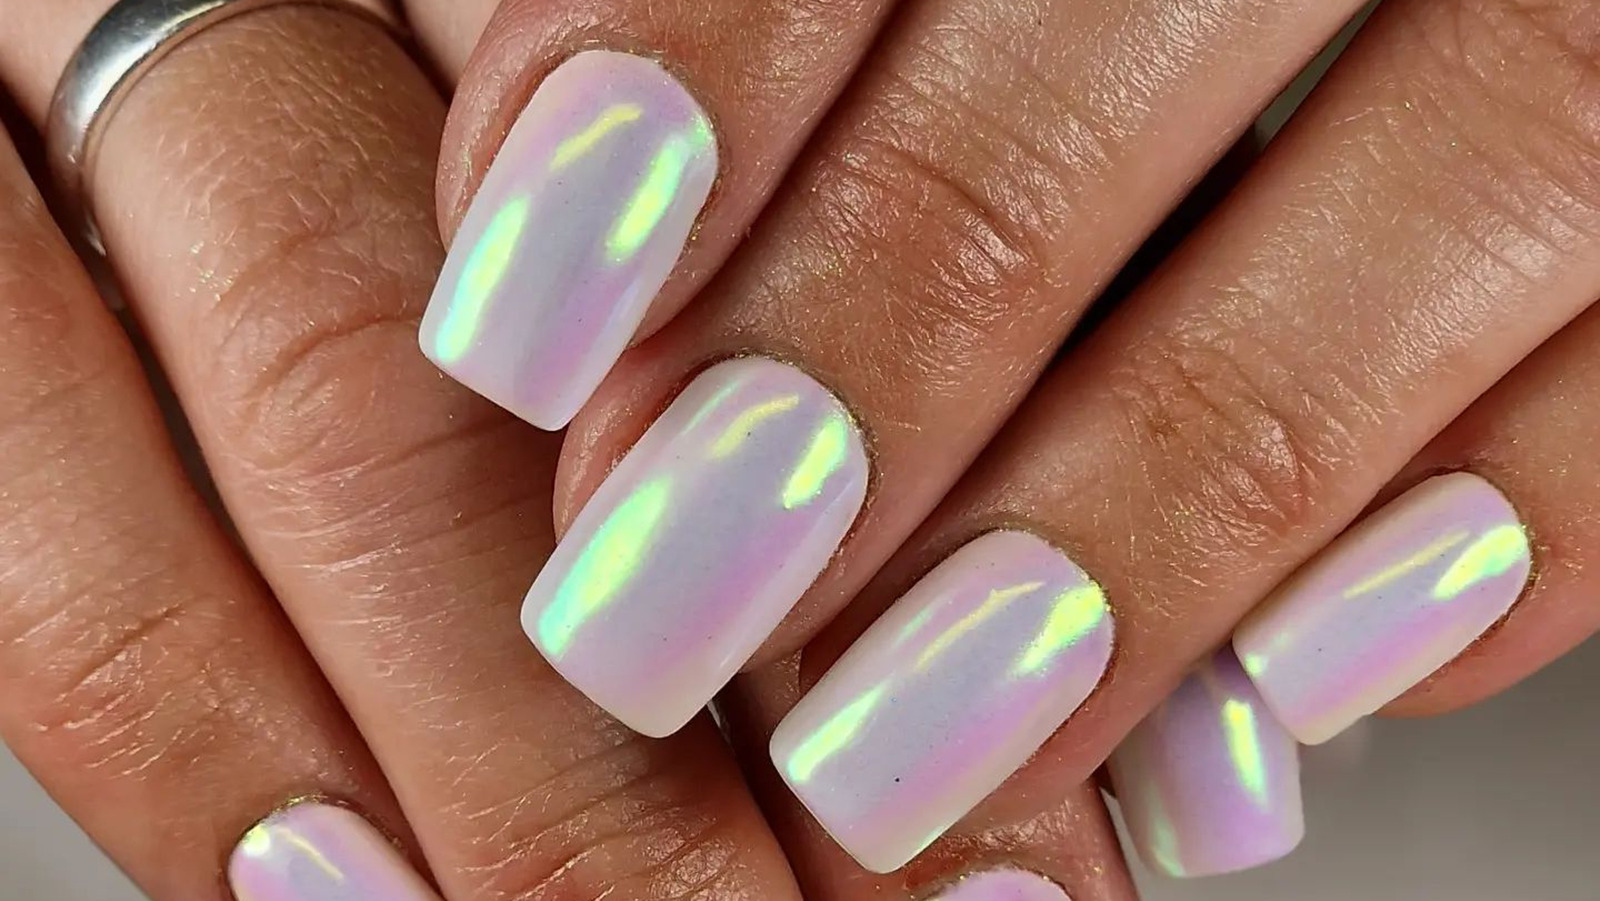 The Playful 'Unicorn Nail' Trend That's Easy To Replicate At Home